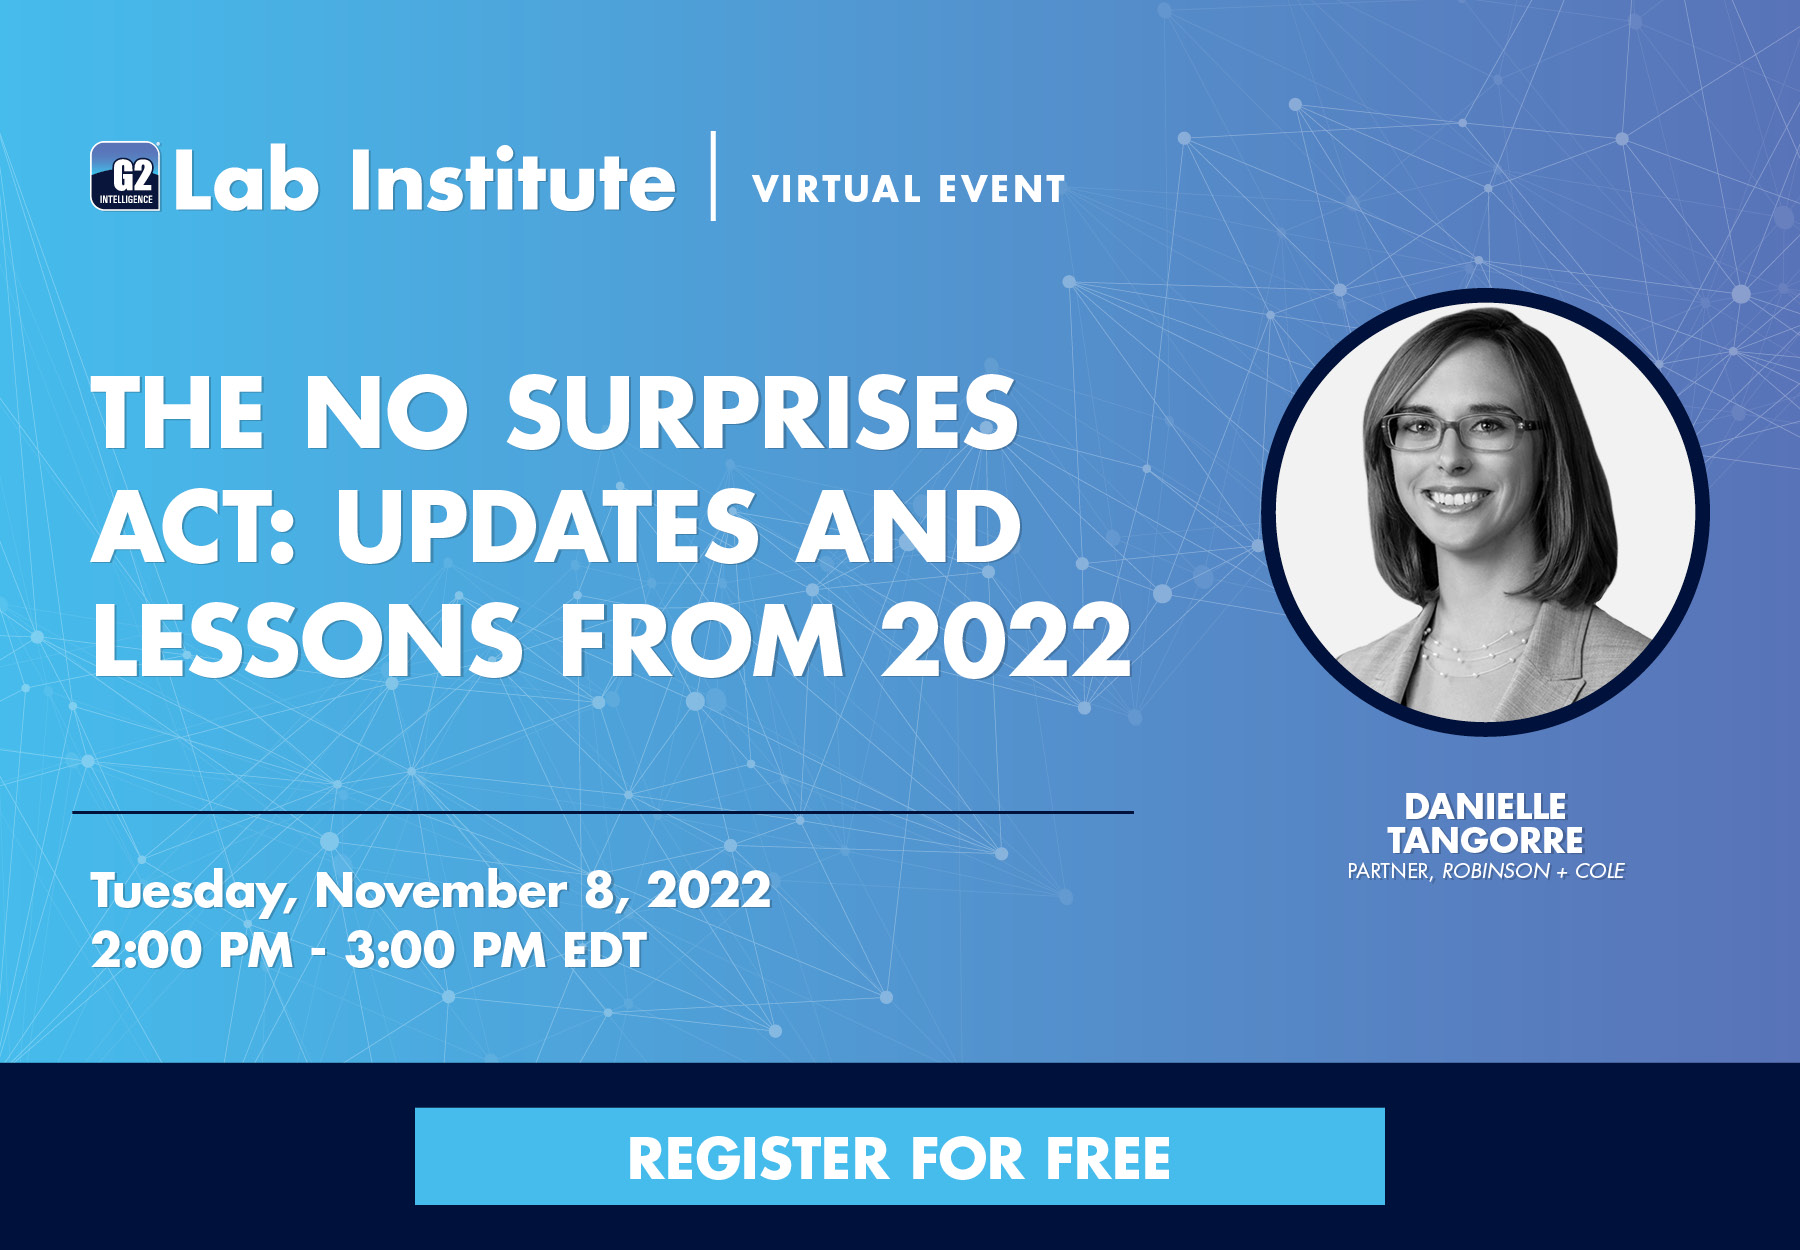 A blue and white image promoting Danielle Tangorre's G2 2022 Lab Institute Virtual Event Presentation on the No Surprises Act